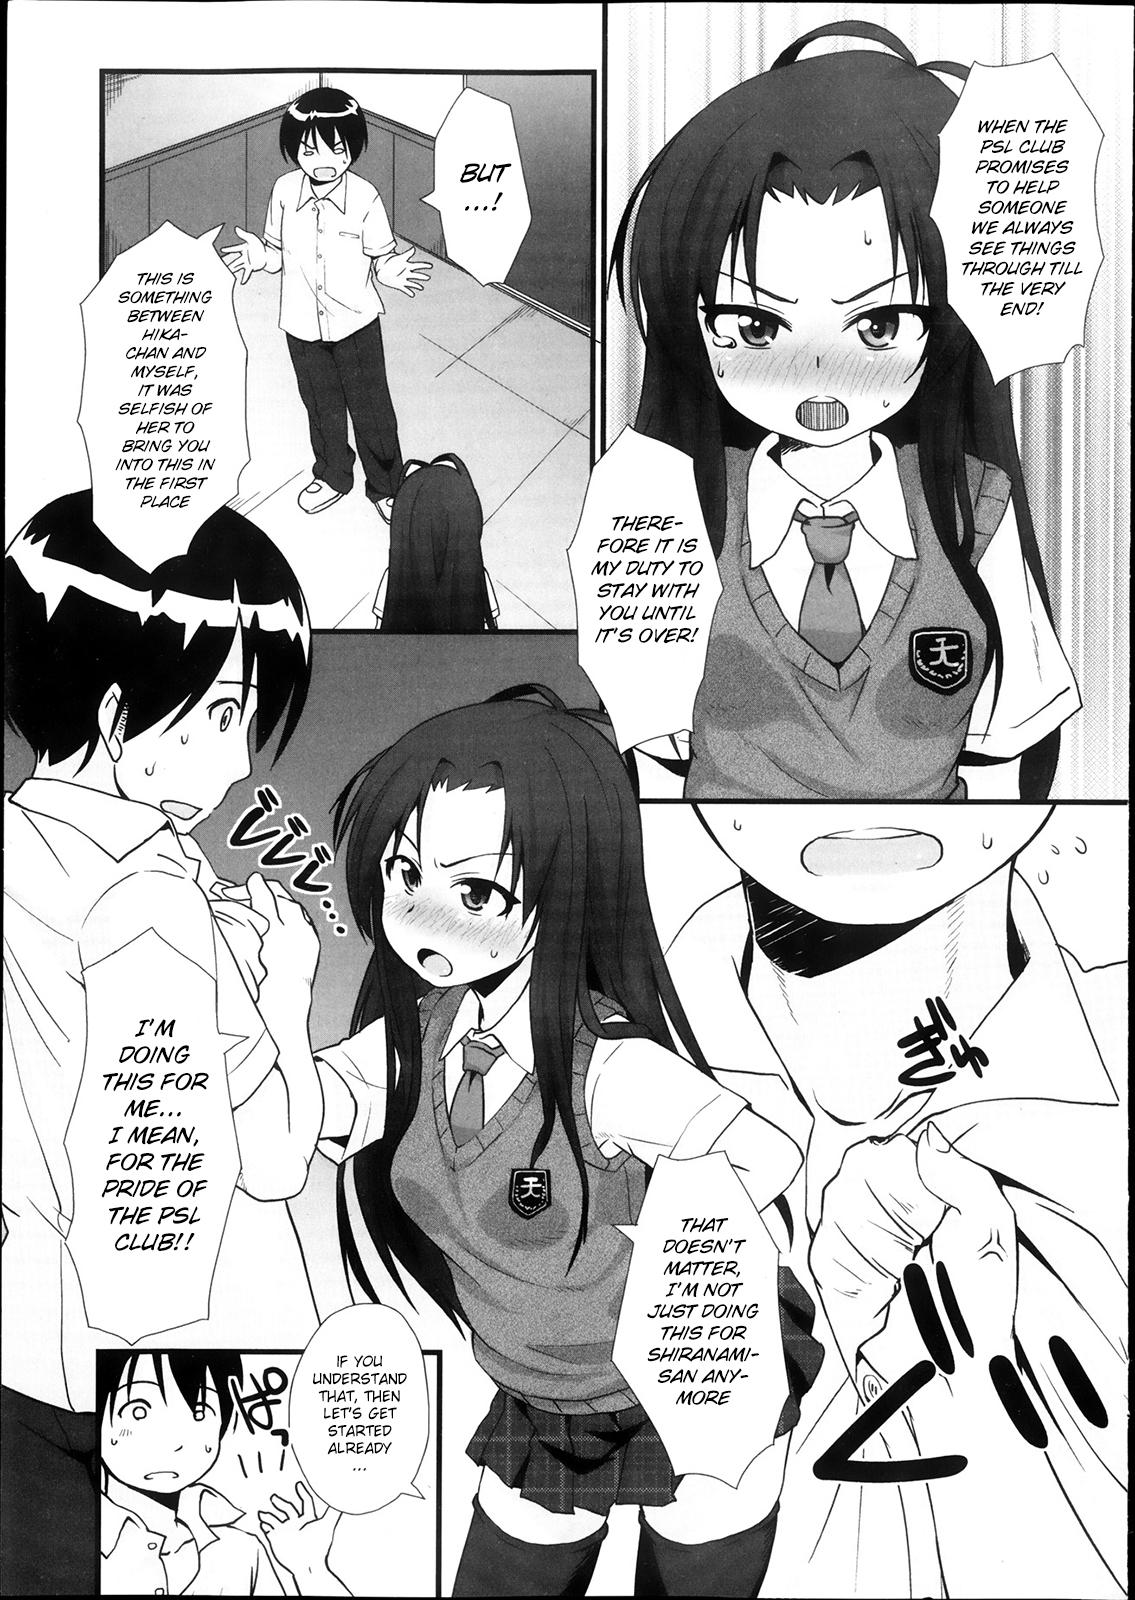 Music PSL-bu e Youkoso | Welcome to the PSL Club Mms - Page 7